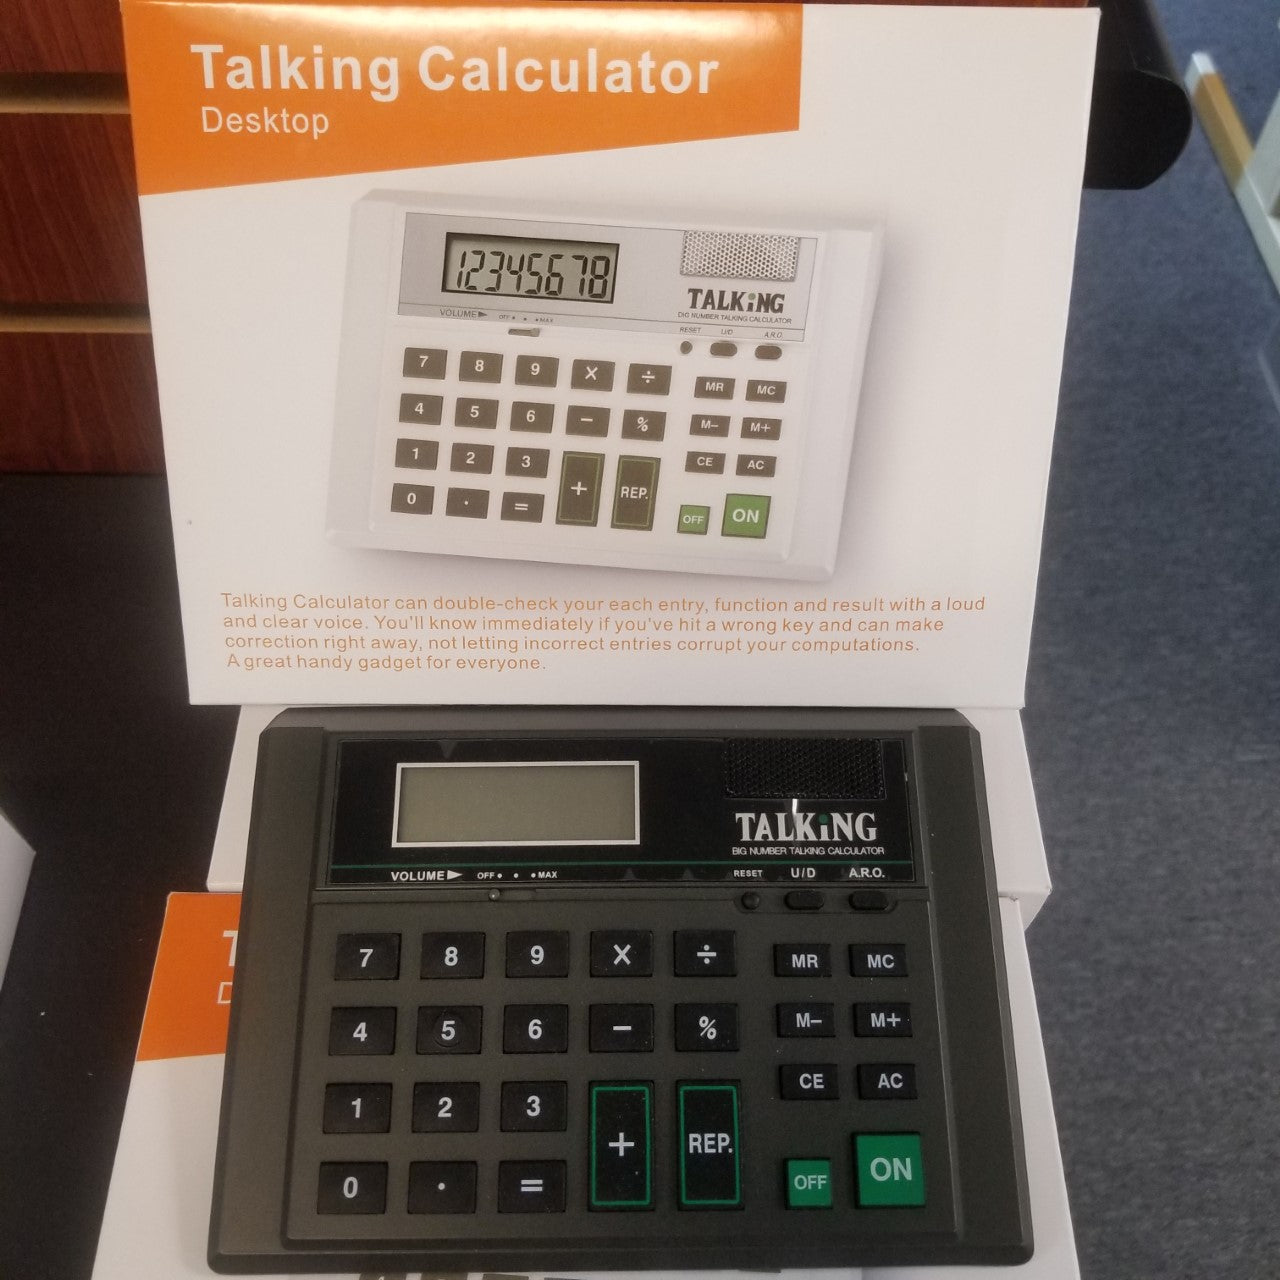 Black, gray and green calculator next to box for talking calculator